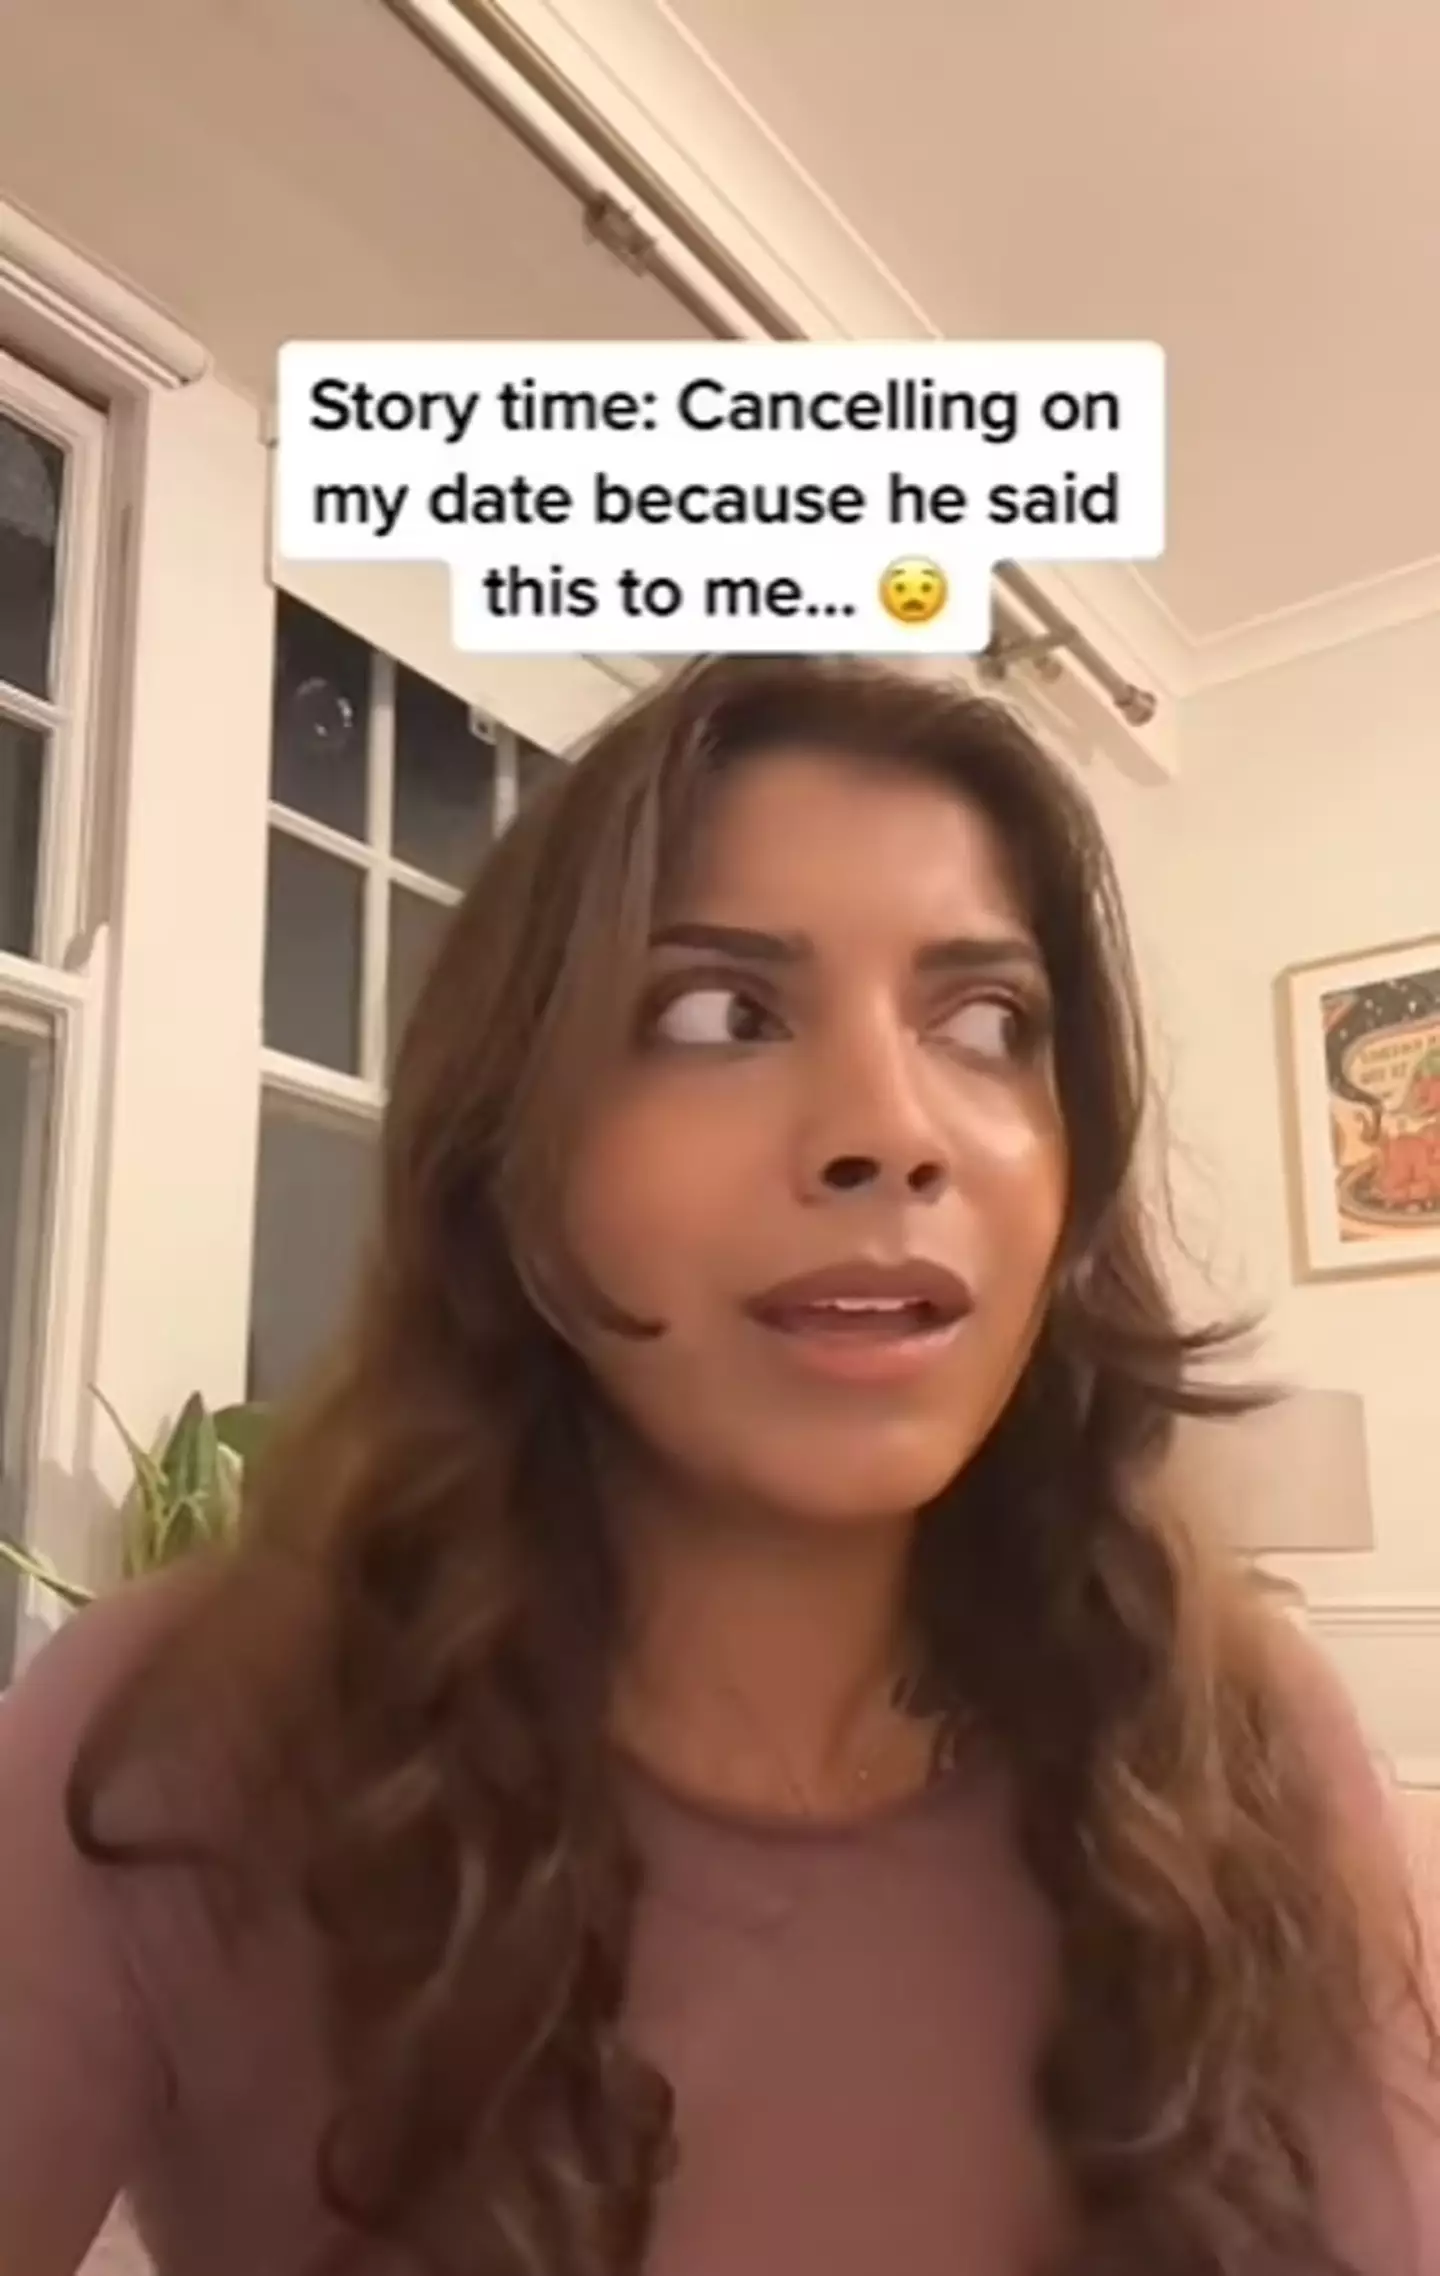 TikTok content creator Utsha Saha has gone viral on the platform after revealing the unsavoury message she got from her date on his way to pick her up.